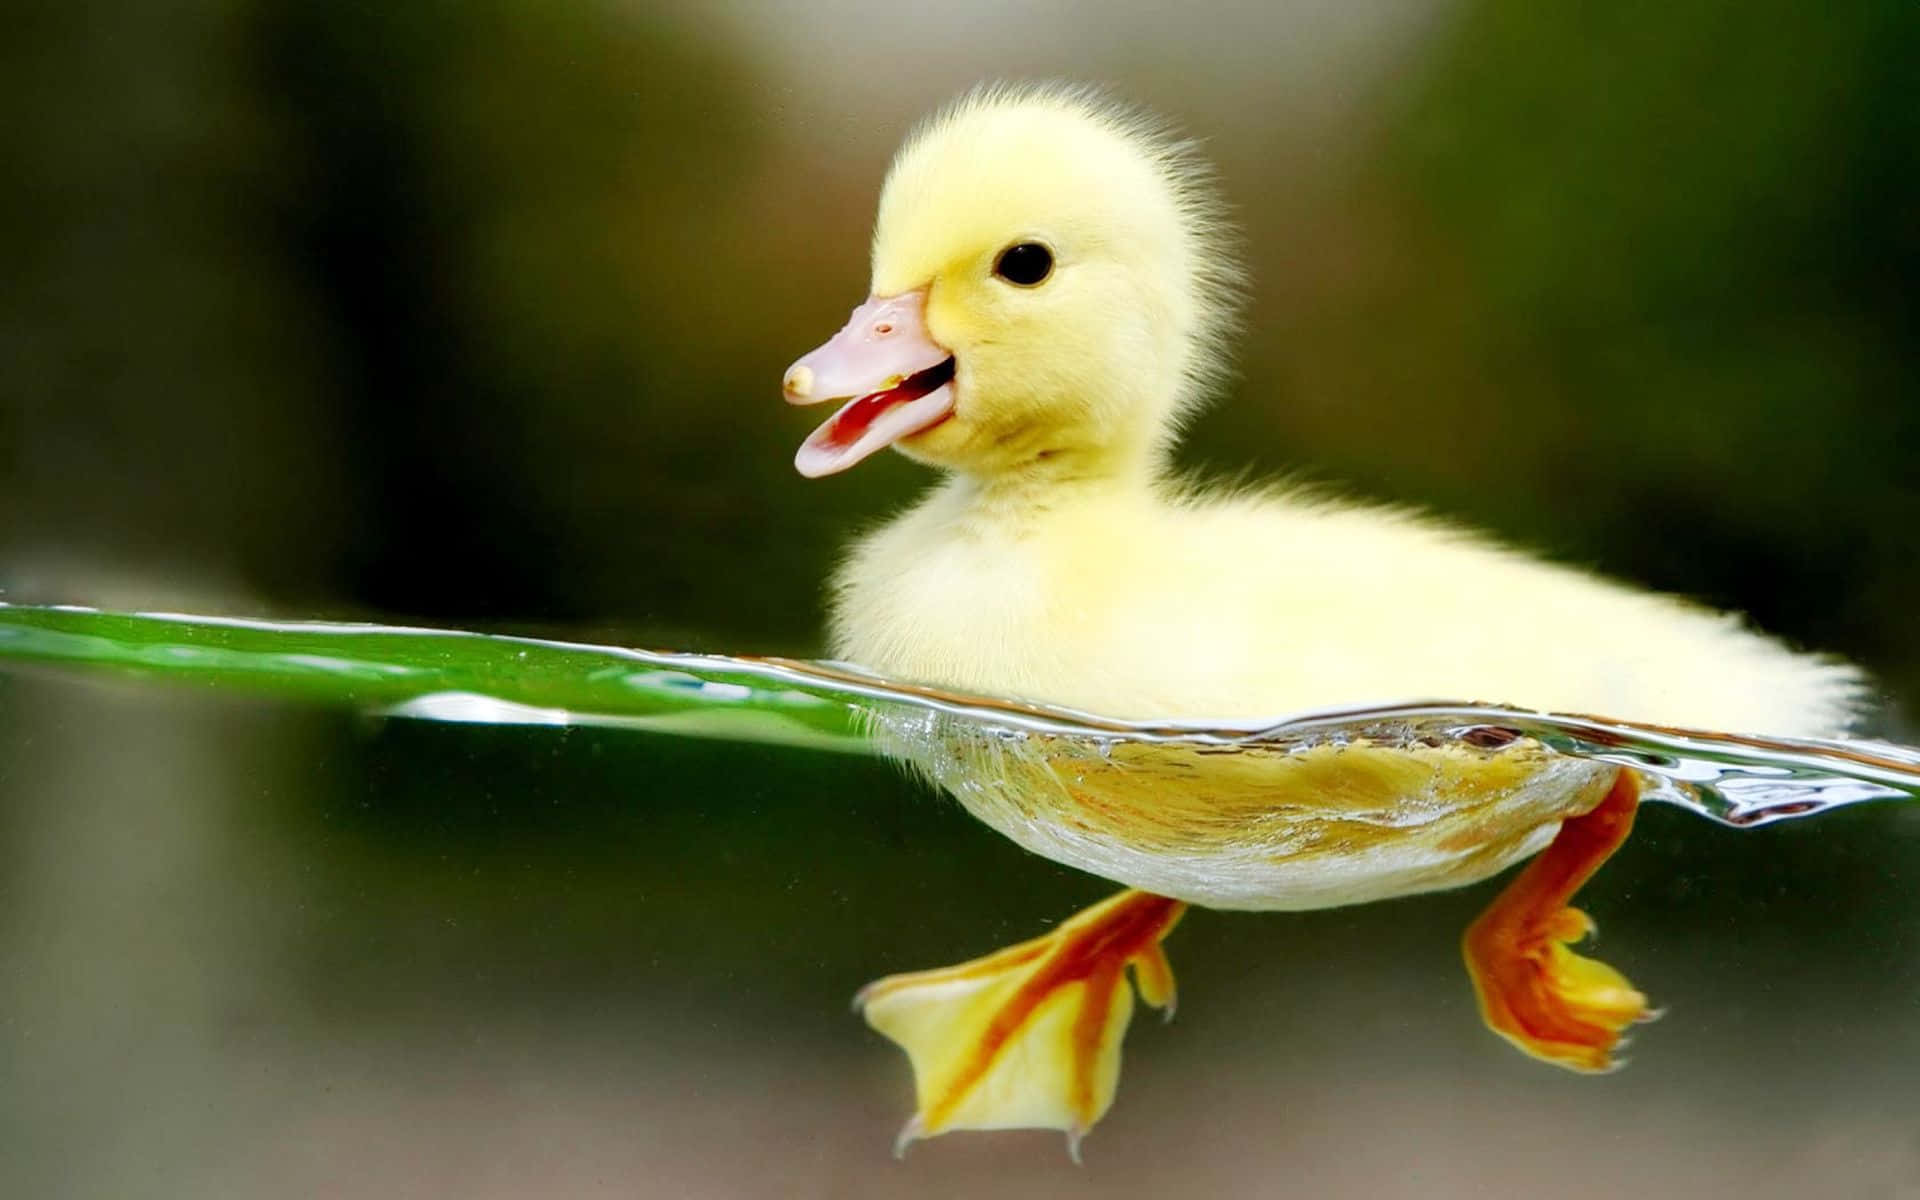 A Small Duck Swimming In Water With Its Mouth Open